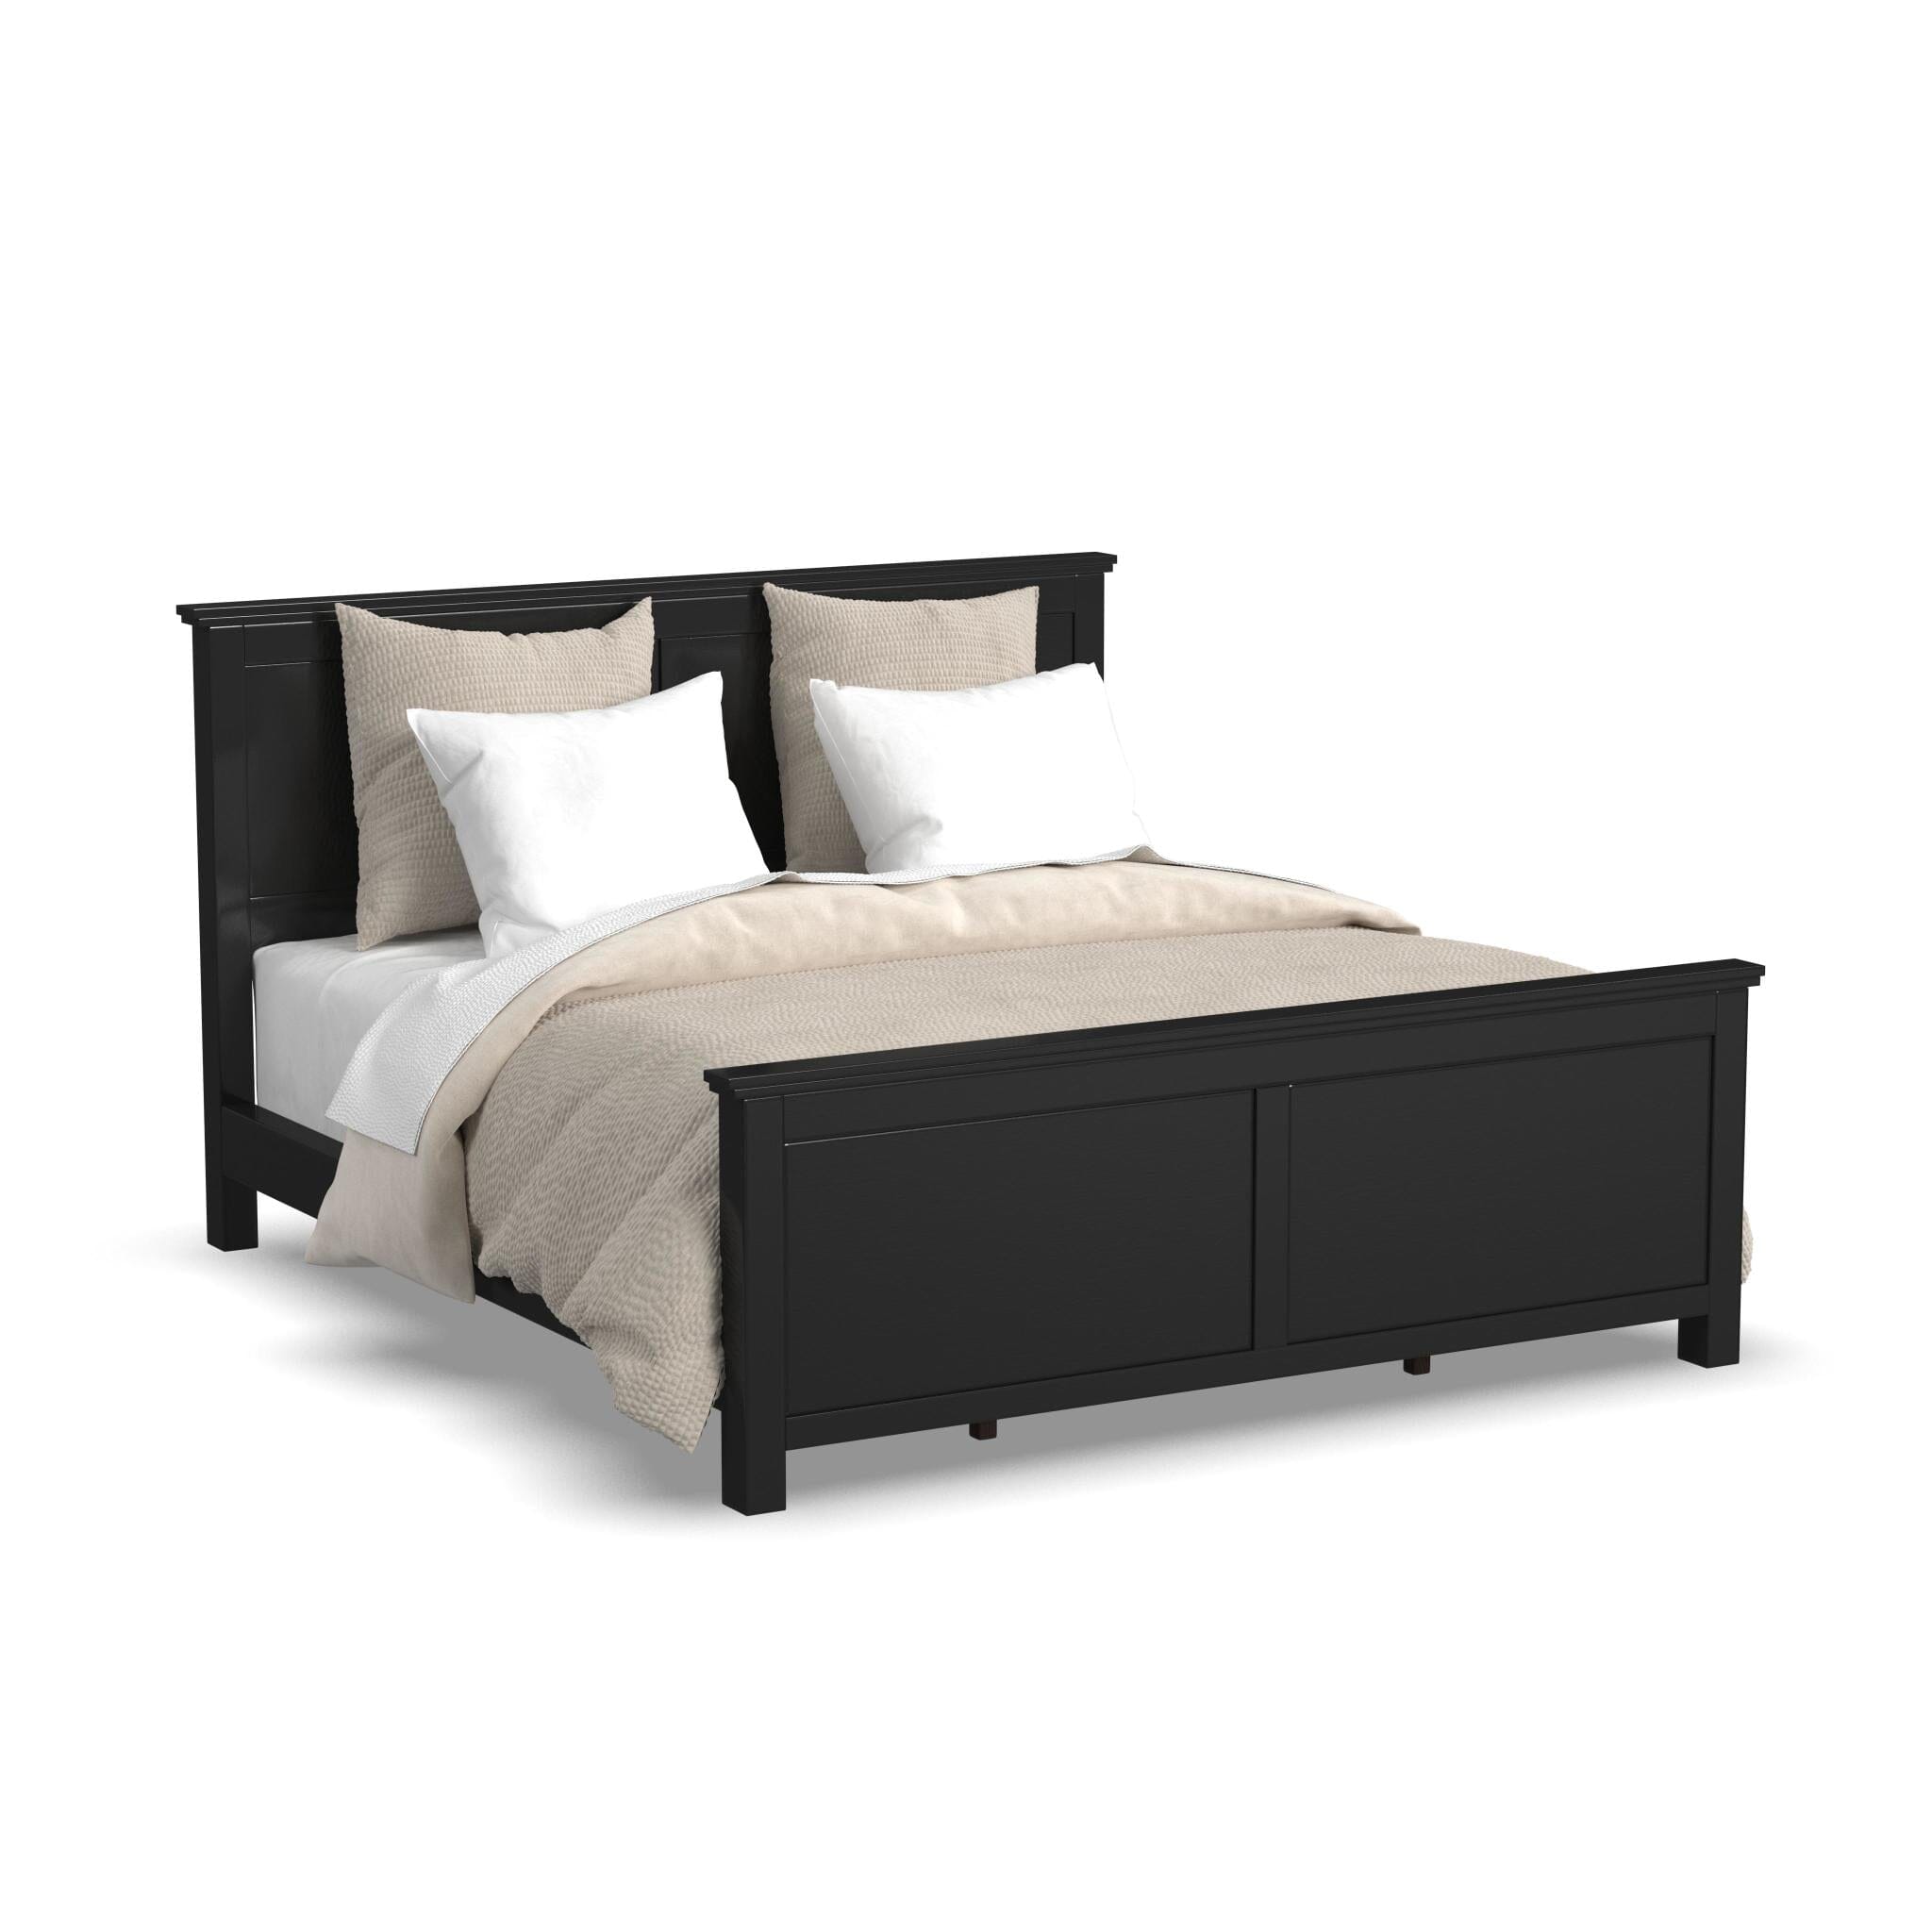 Traditional King Bed and Two Nightstands By Oak Park King Bed Set Oak Park